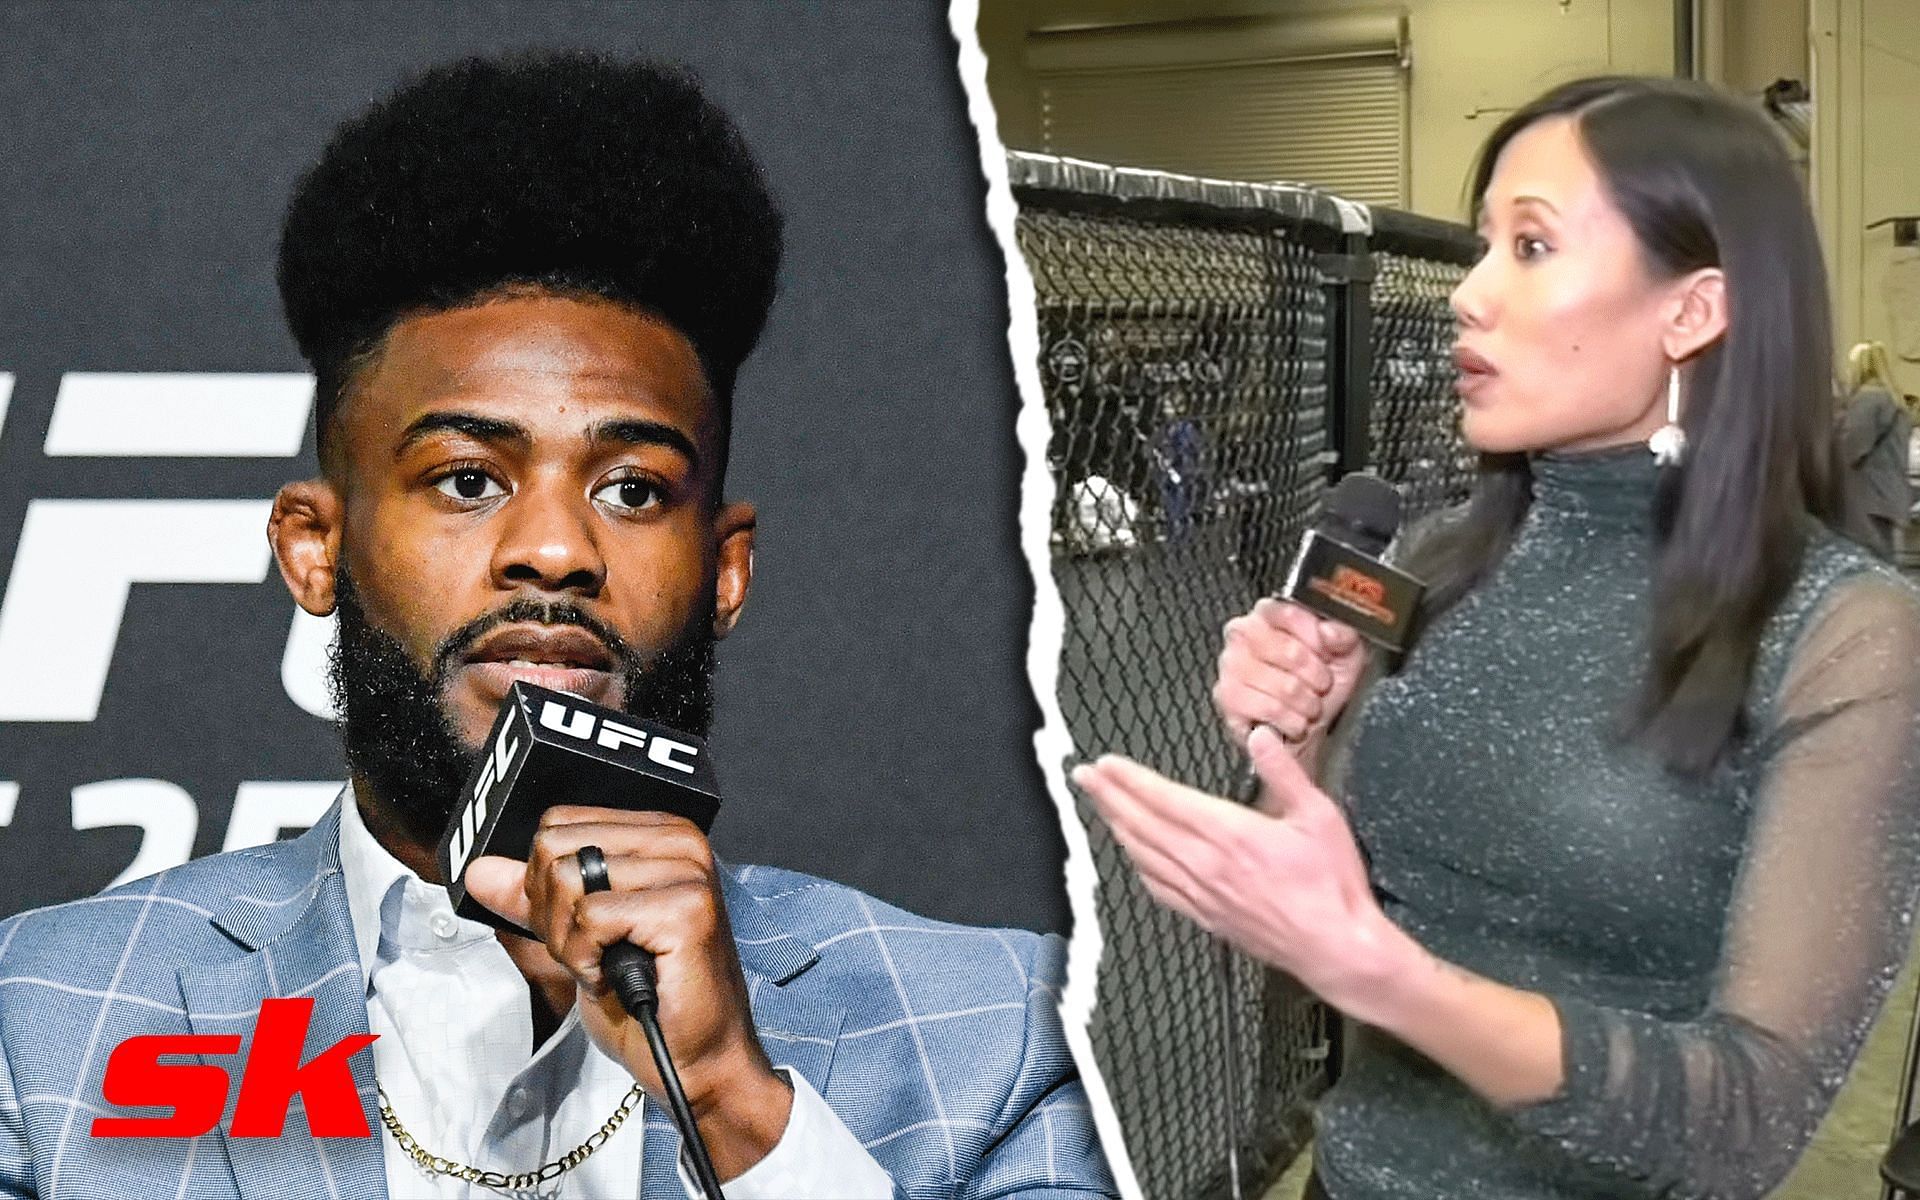 Ahead of UFC 288 Aljamain Sterling issues clarification on viral video [Images via: @helenyeesports on Instagram]